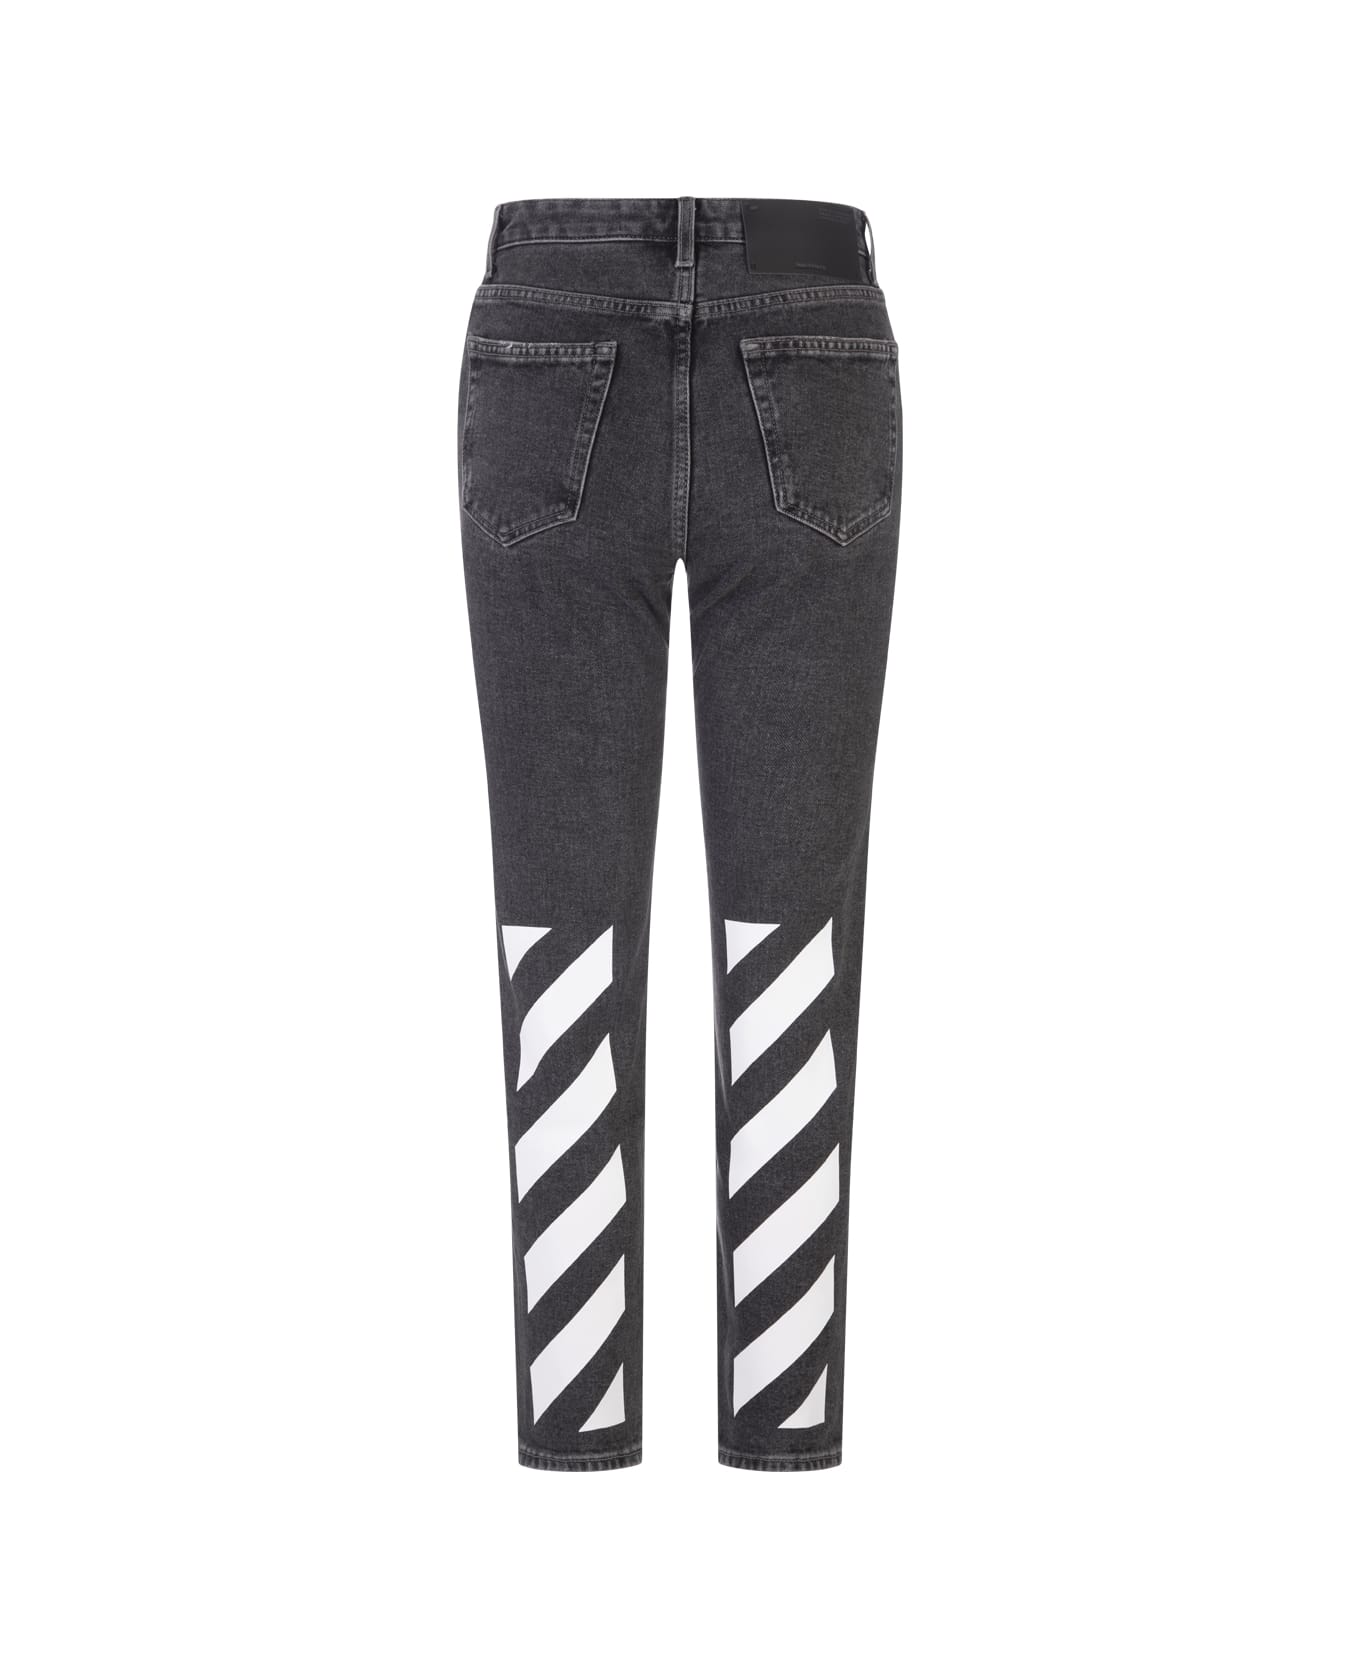 Off-White Woman Grey Jeans With Logo And Diagonals - Dark grey